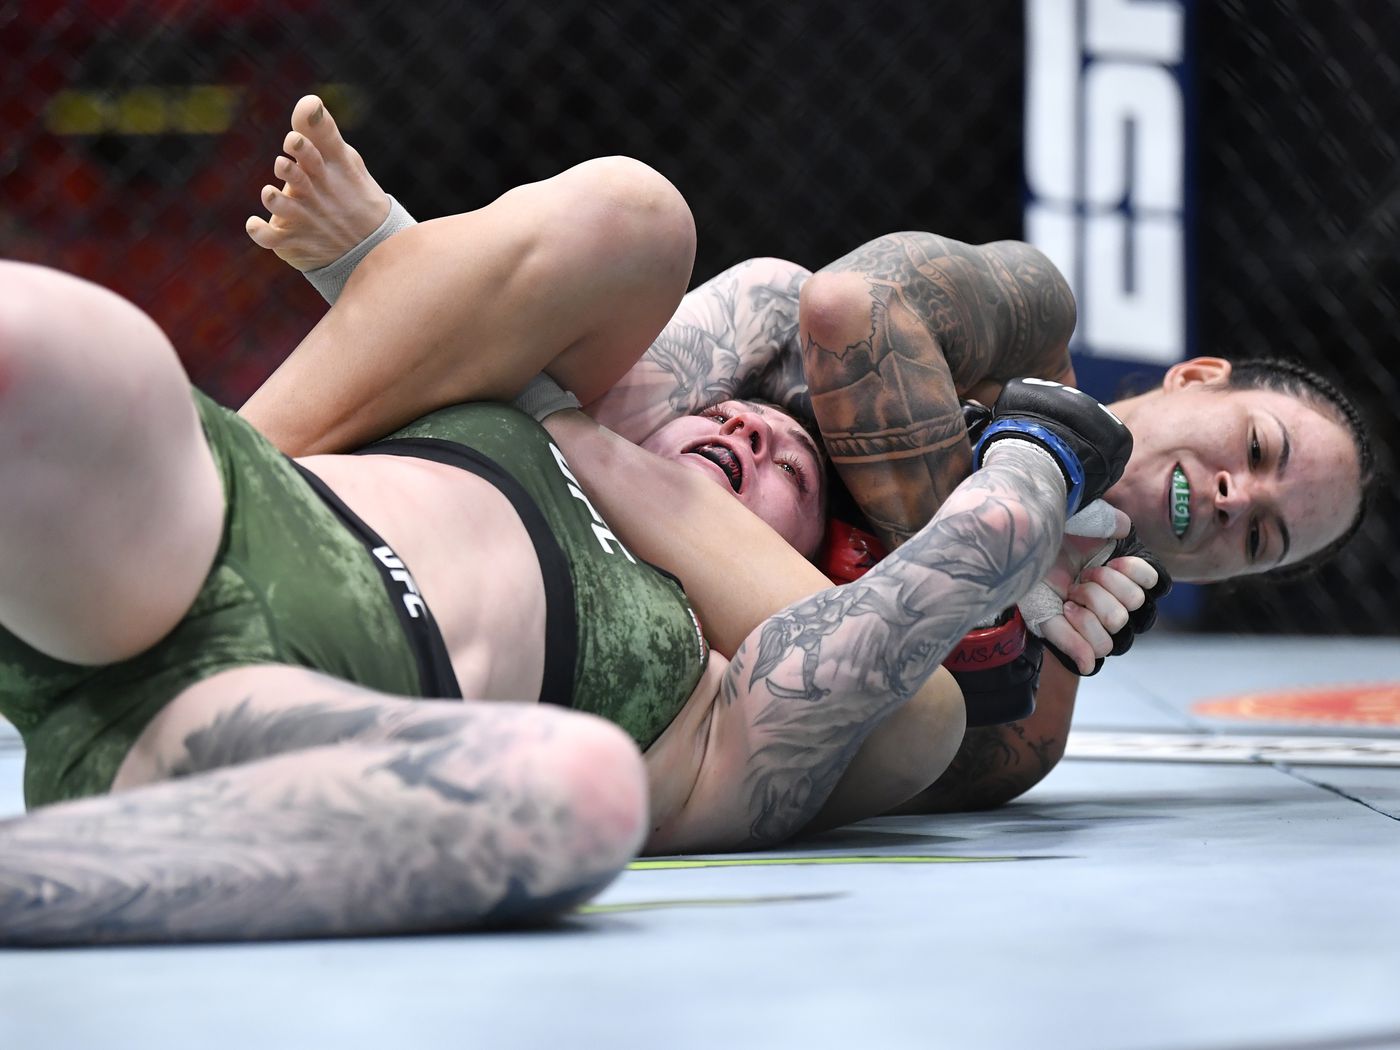 UFC 259 results: Amanda Nunes mauls Megan Anderson, finishes with armbar in first round - MMA Fighting